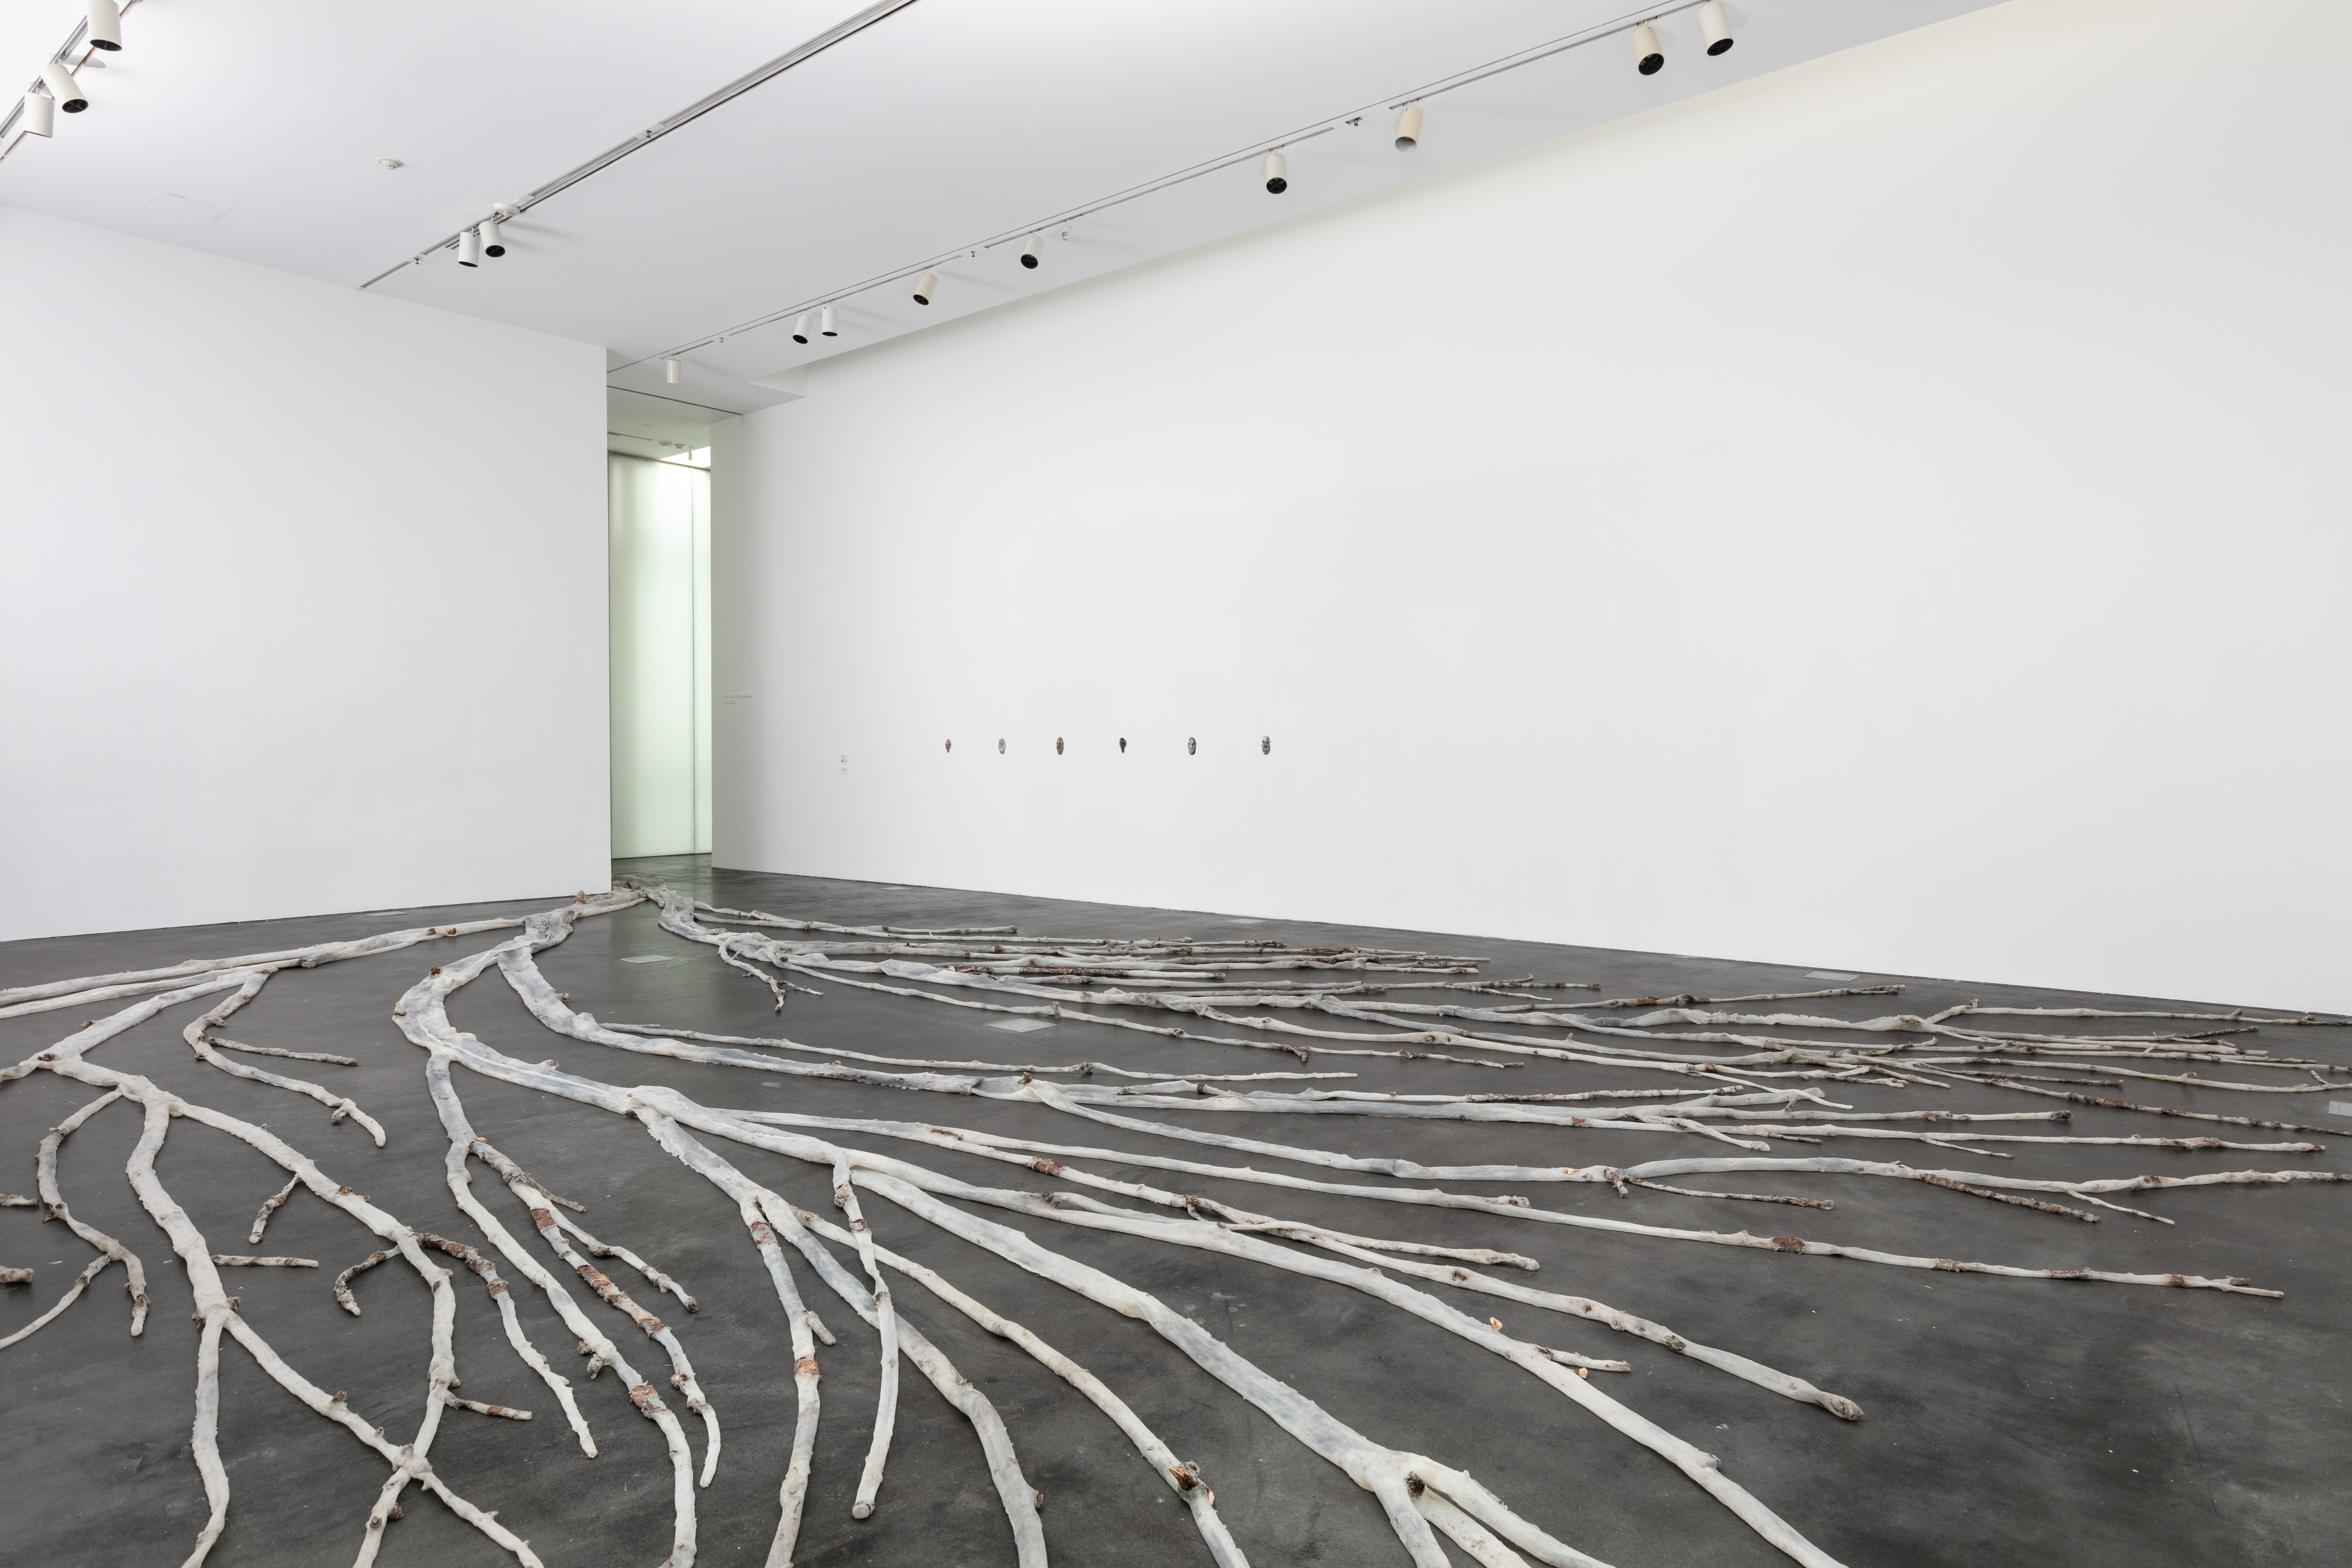 Large plastered tree sprawled out on the ground in a gallery with white walls and dark flooring.